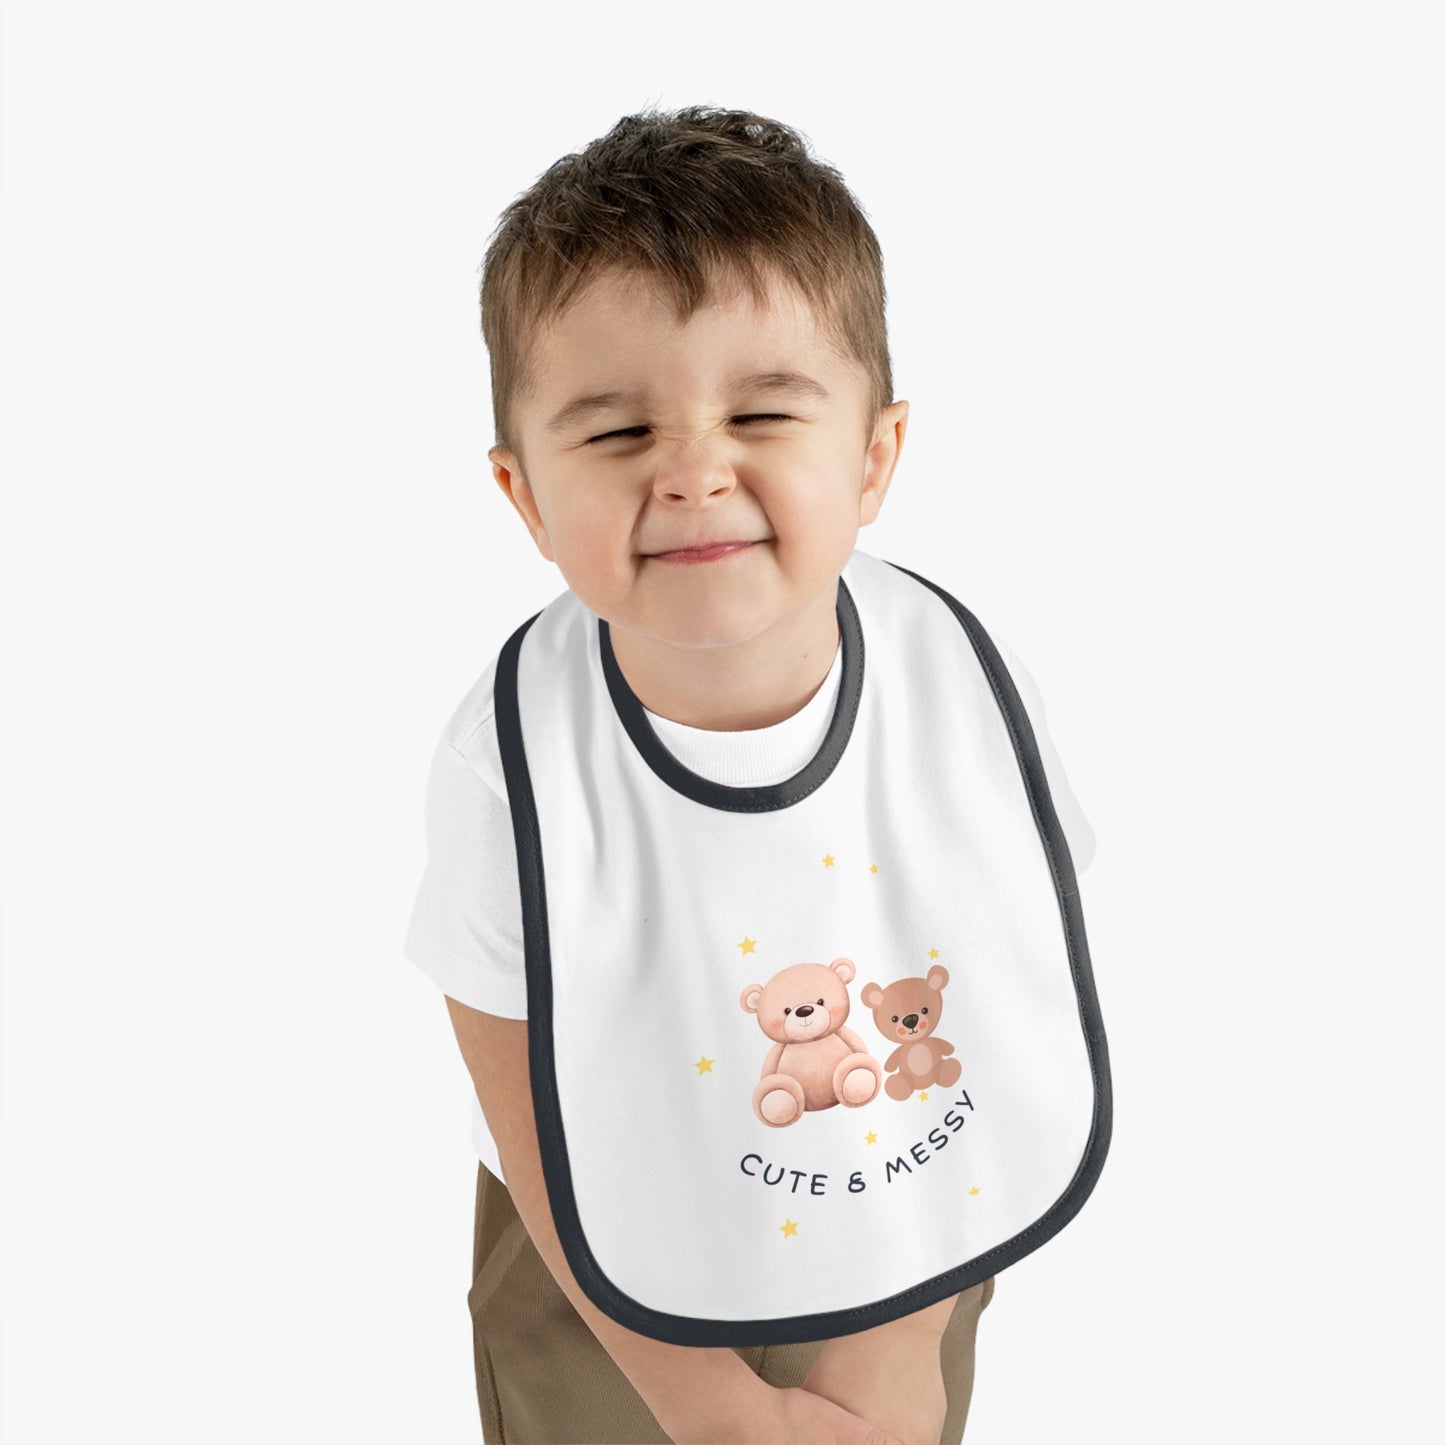 "Bear Hugs & Messy Smiles Adorable Contrast Trim Jersey Bibs for Your Little One's Cute and Playful Adventures!"